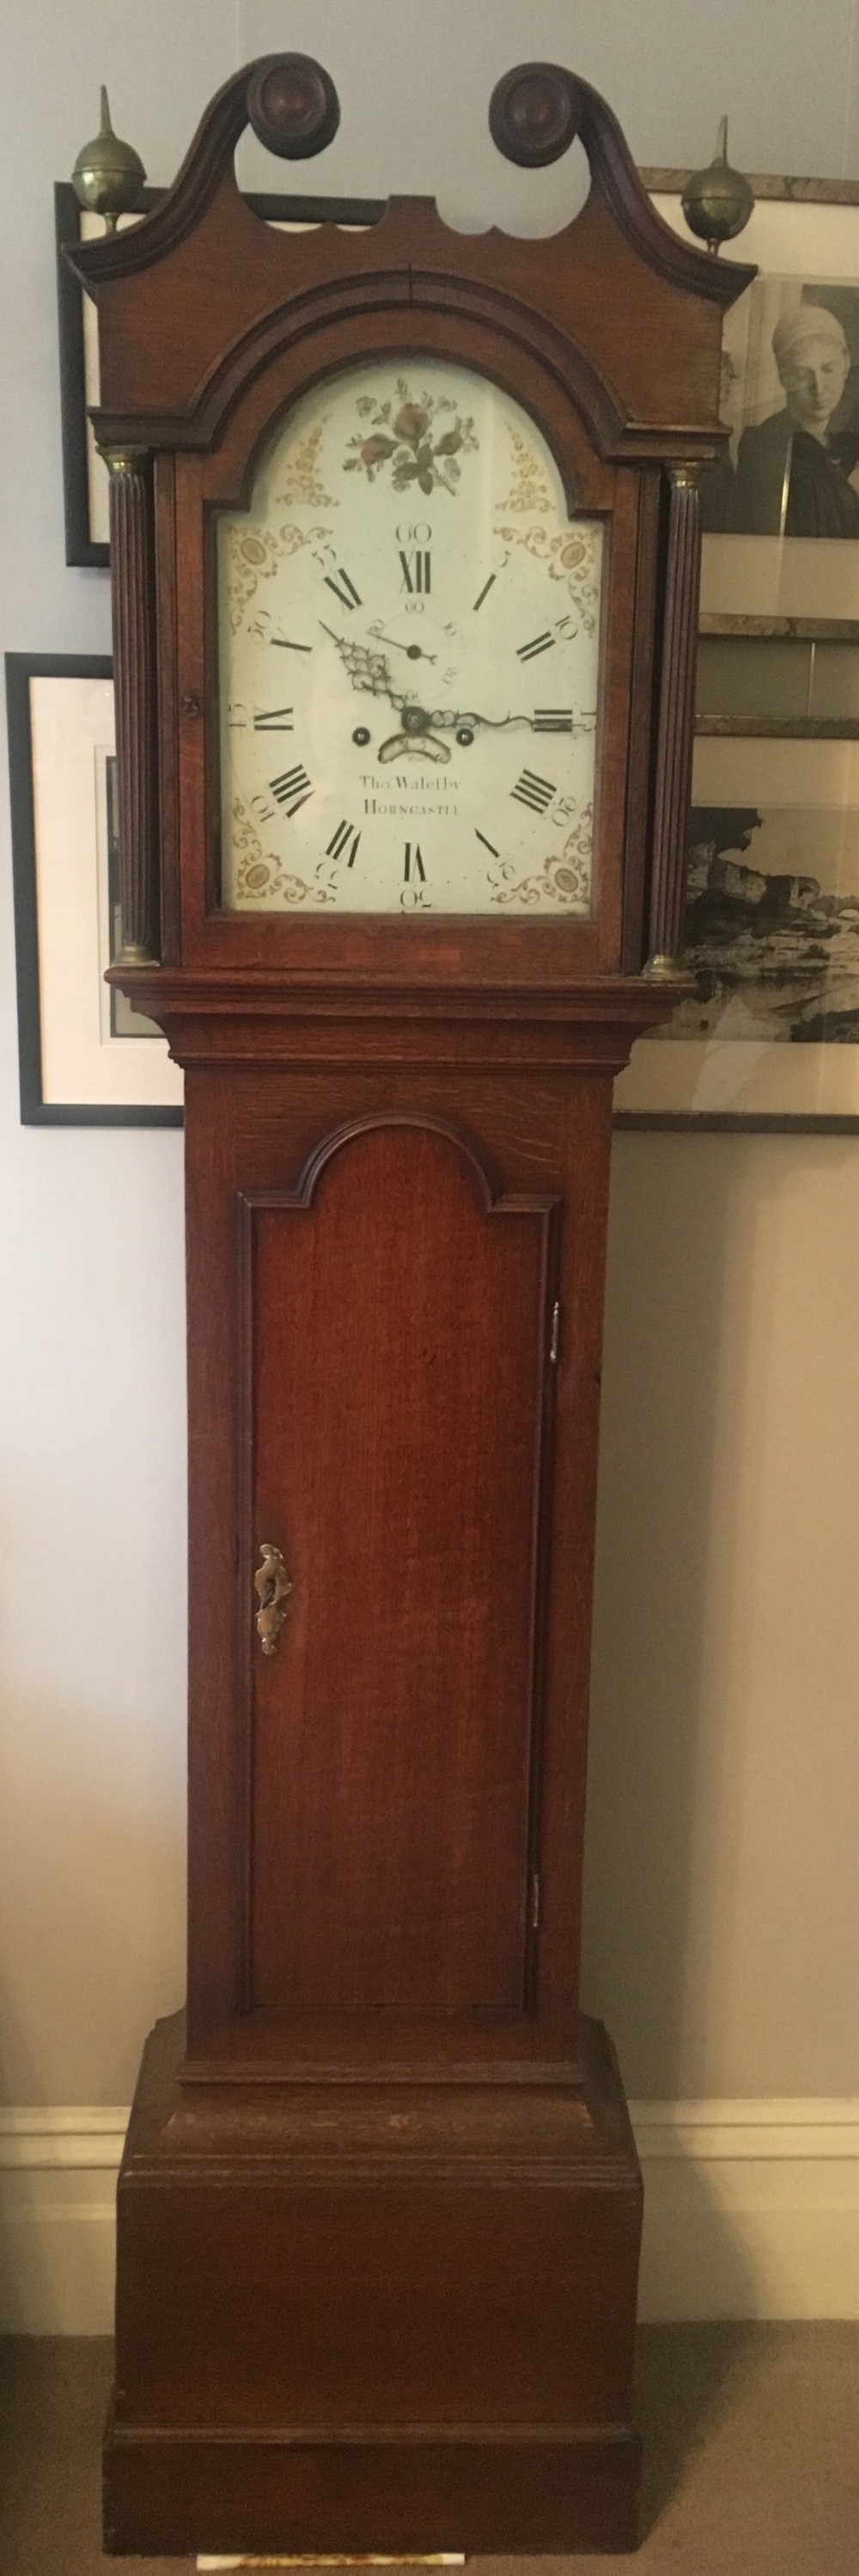 c18th longcase clock by thomas walesby of horncastle